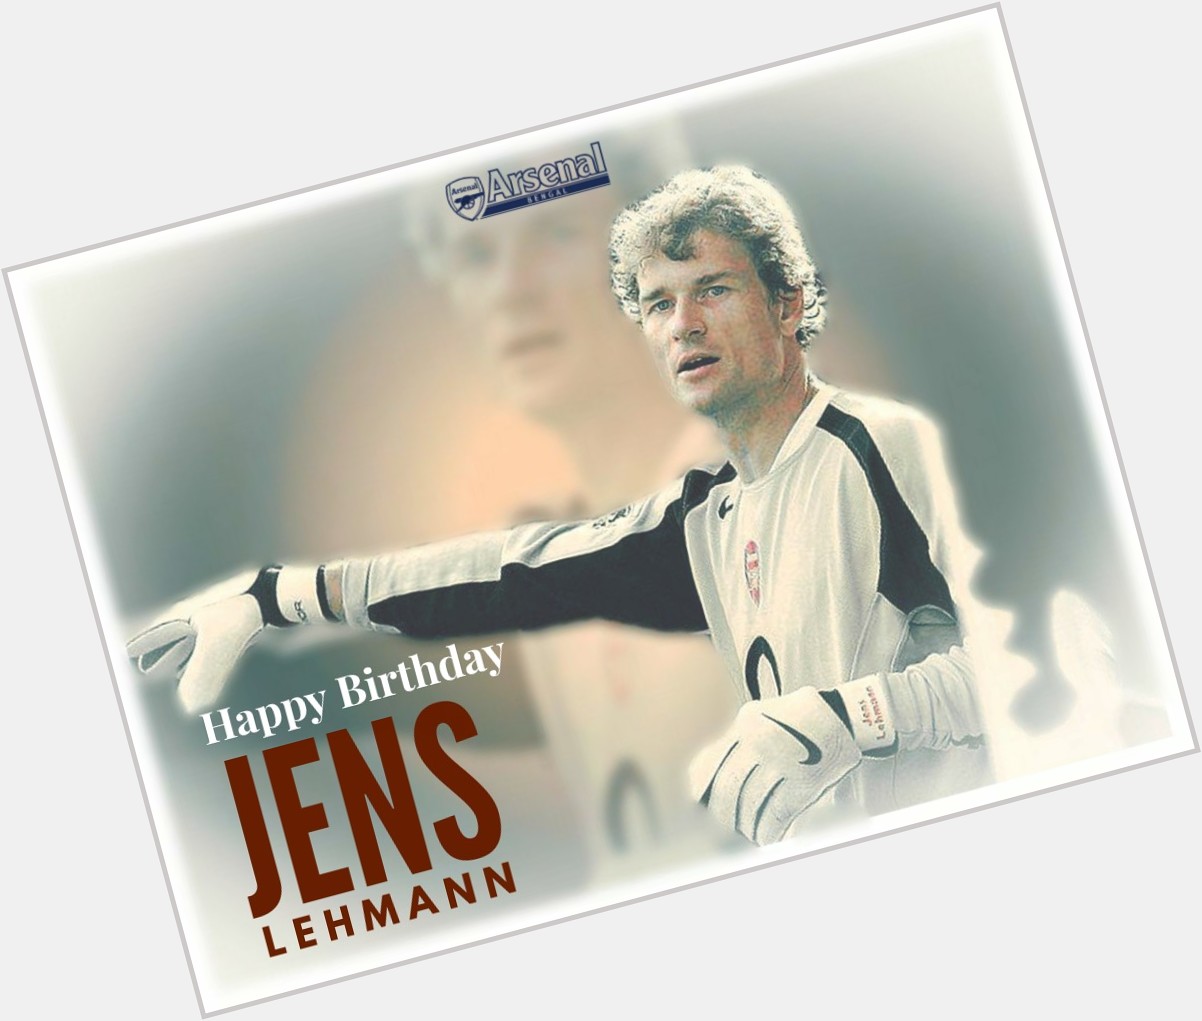 Our Mad Jens turns 51 today! 

Happy birthday, Jens Lehmann!  